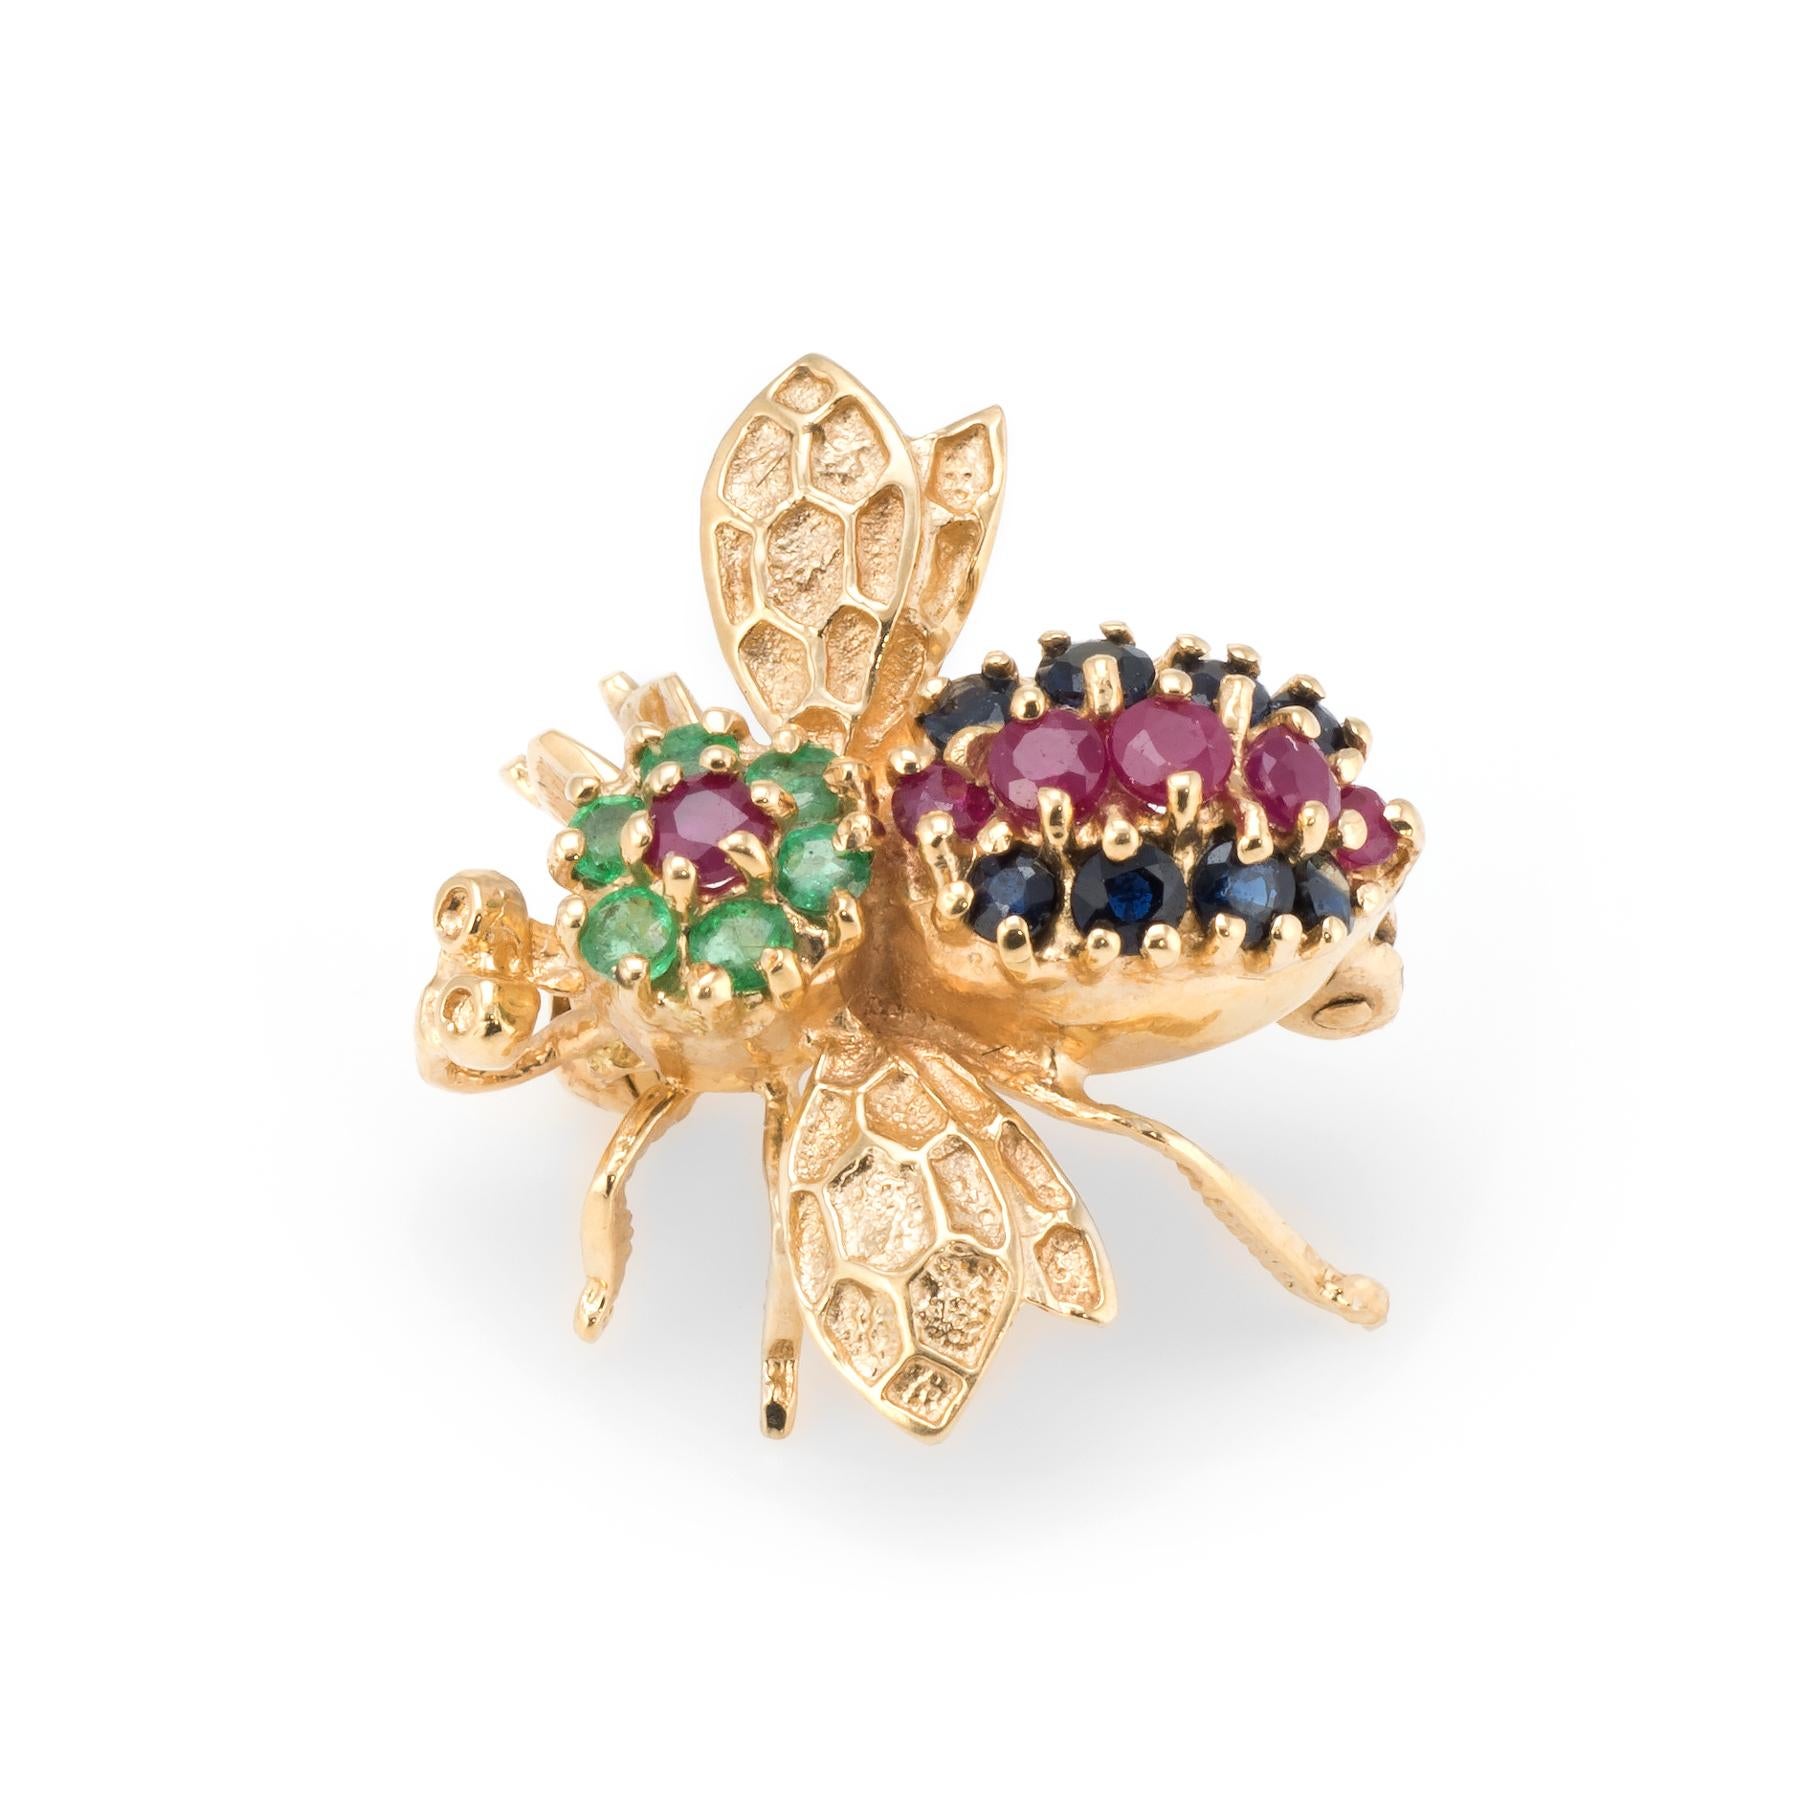 Finely detailed vintage bumble bee brooch, crafted in 14 karat yellow gold.  

Sapphires total an estimated 0.16 carats, emeralds total an estimated 0.12 carats and rubies total an estimated 0.12 carats. The gemstones are in excellent condition free